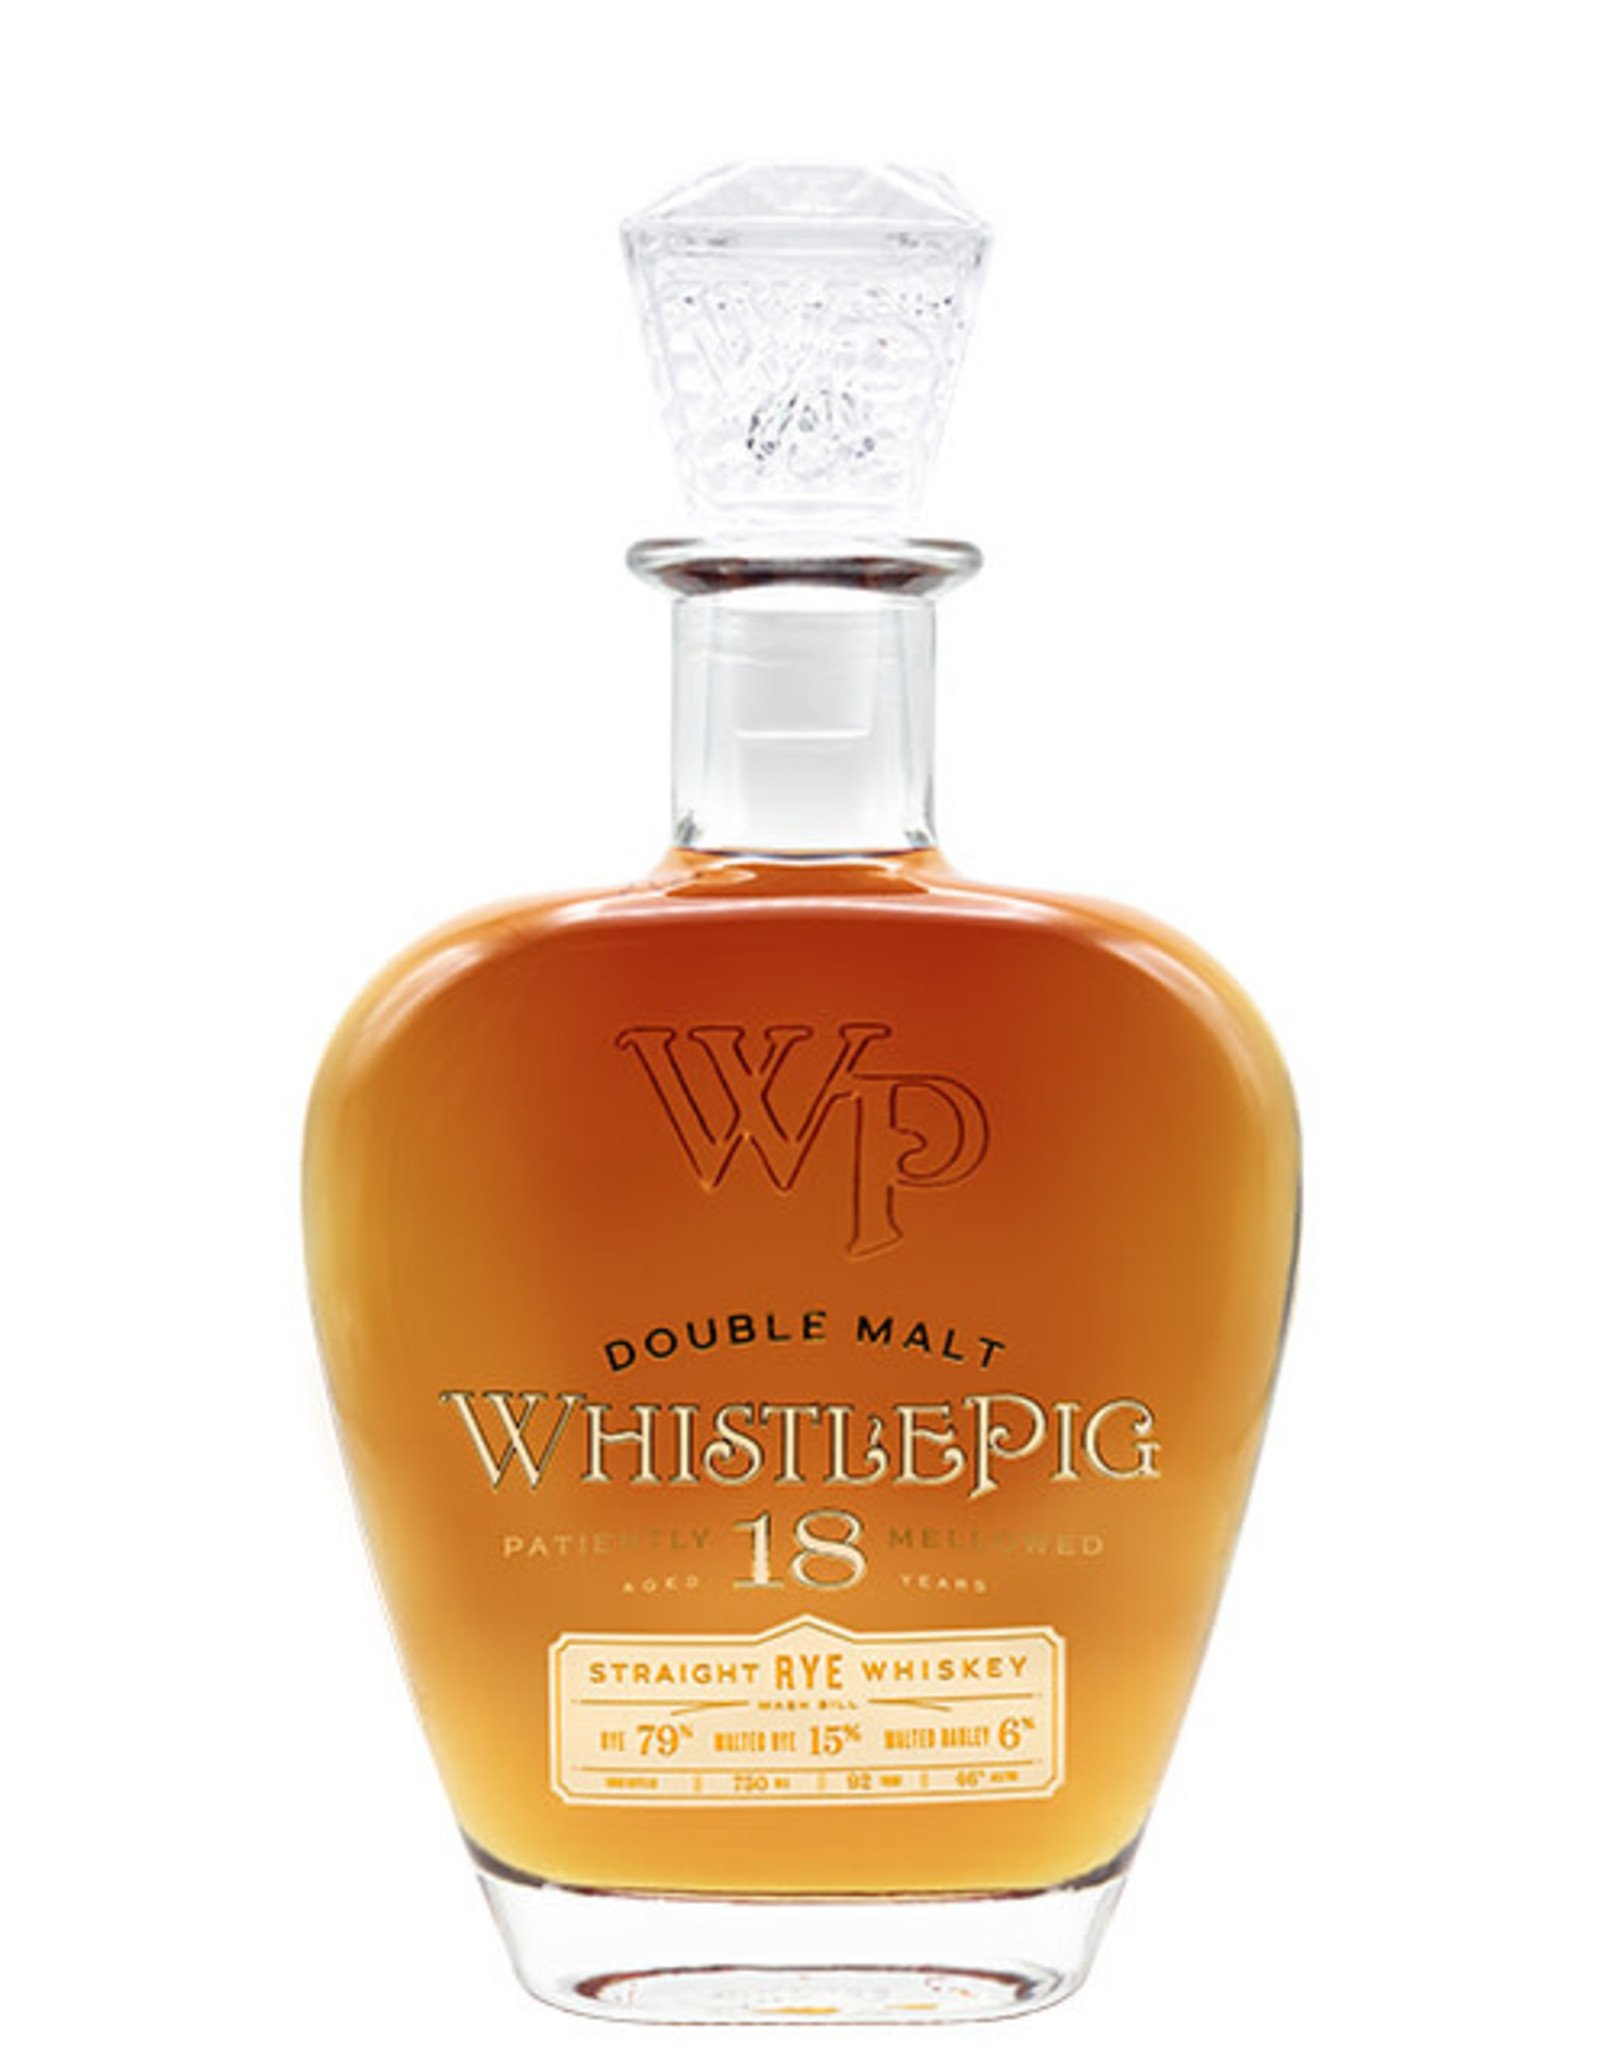 WhistlePig 18 year